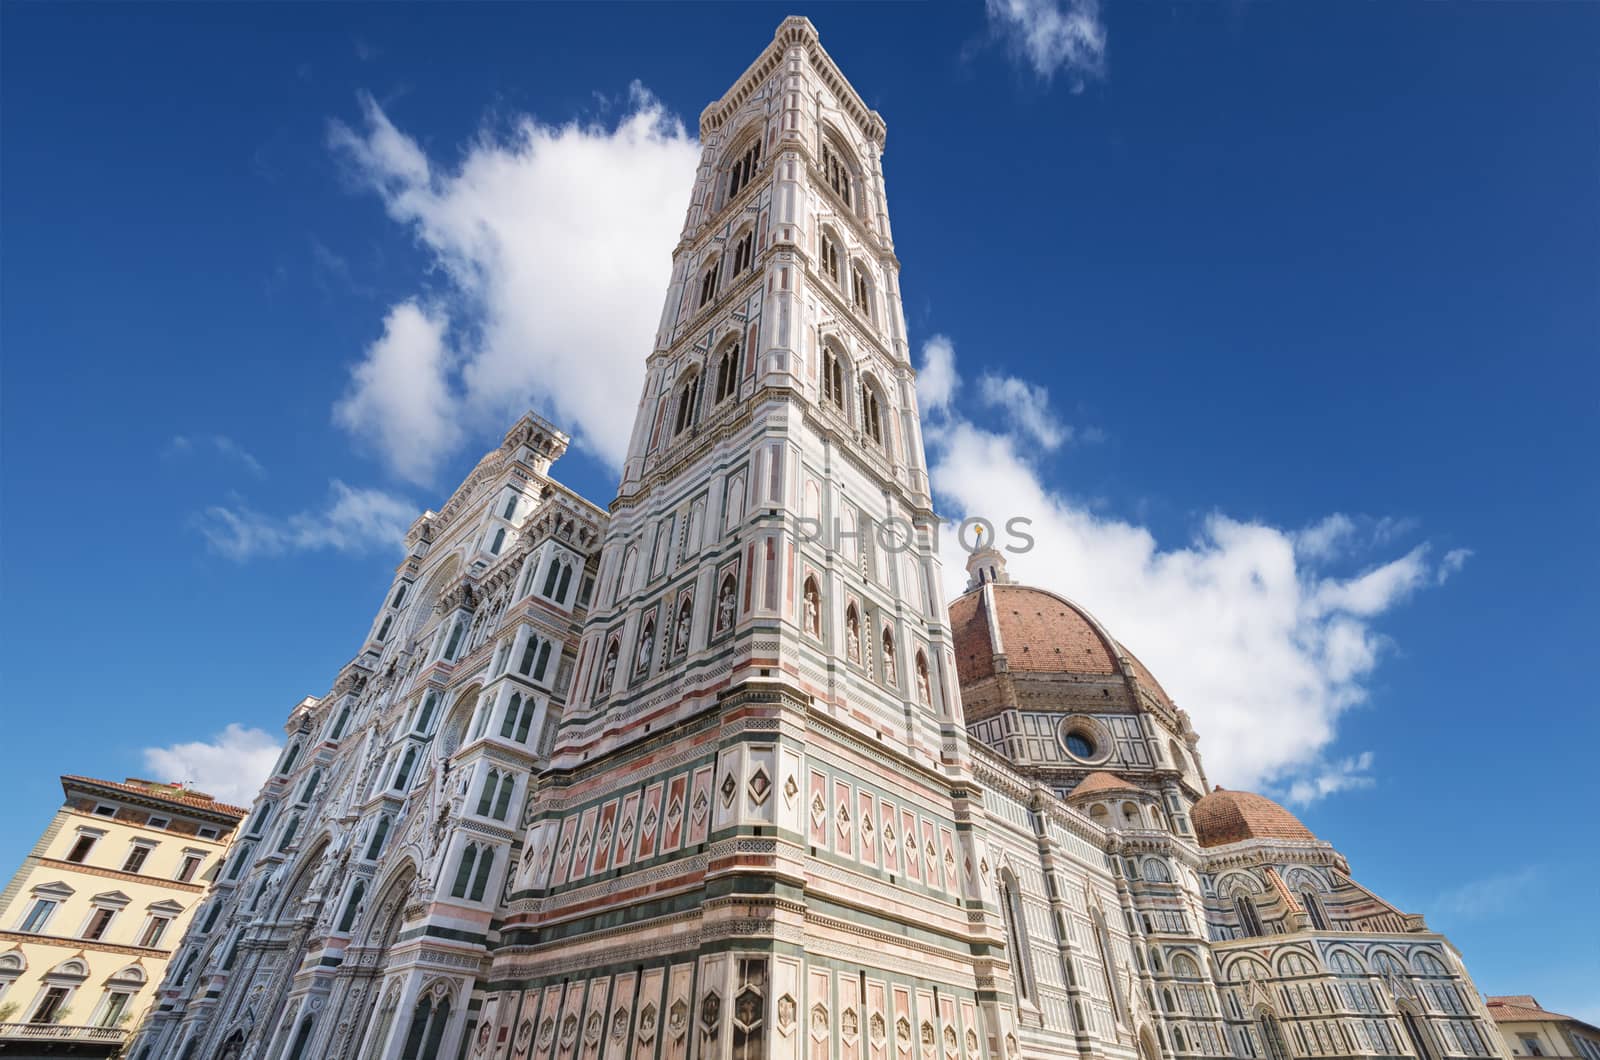 facade of famous Florence cathedral, Santa Maria del Fiore. by HERRAEZ